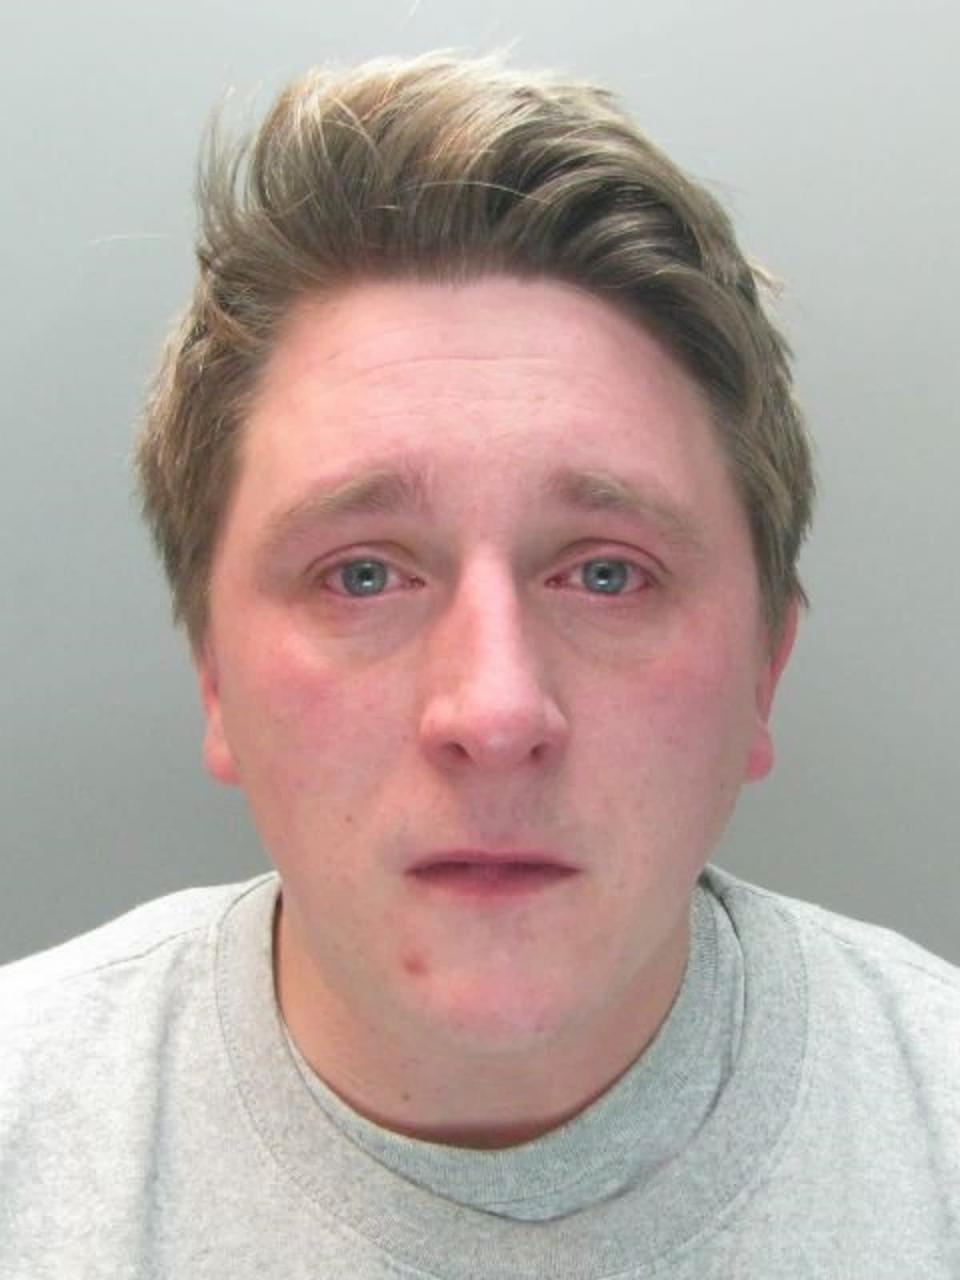 Sam Pybus, who was arrested after admitting to the manslaughter of Sophie Moss, who he suffocated during consensual sex at his home in Darlington (Durham Police/PA) (PA Media)